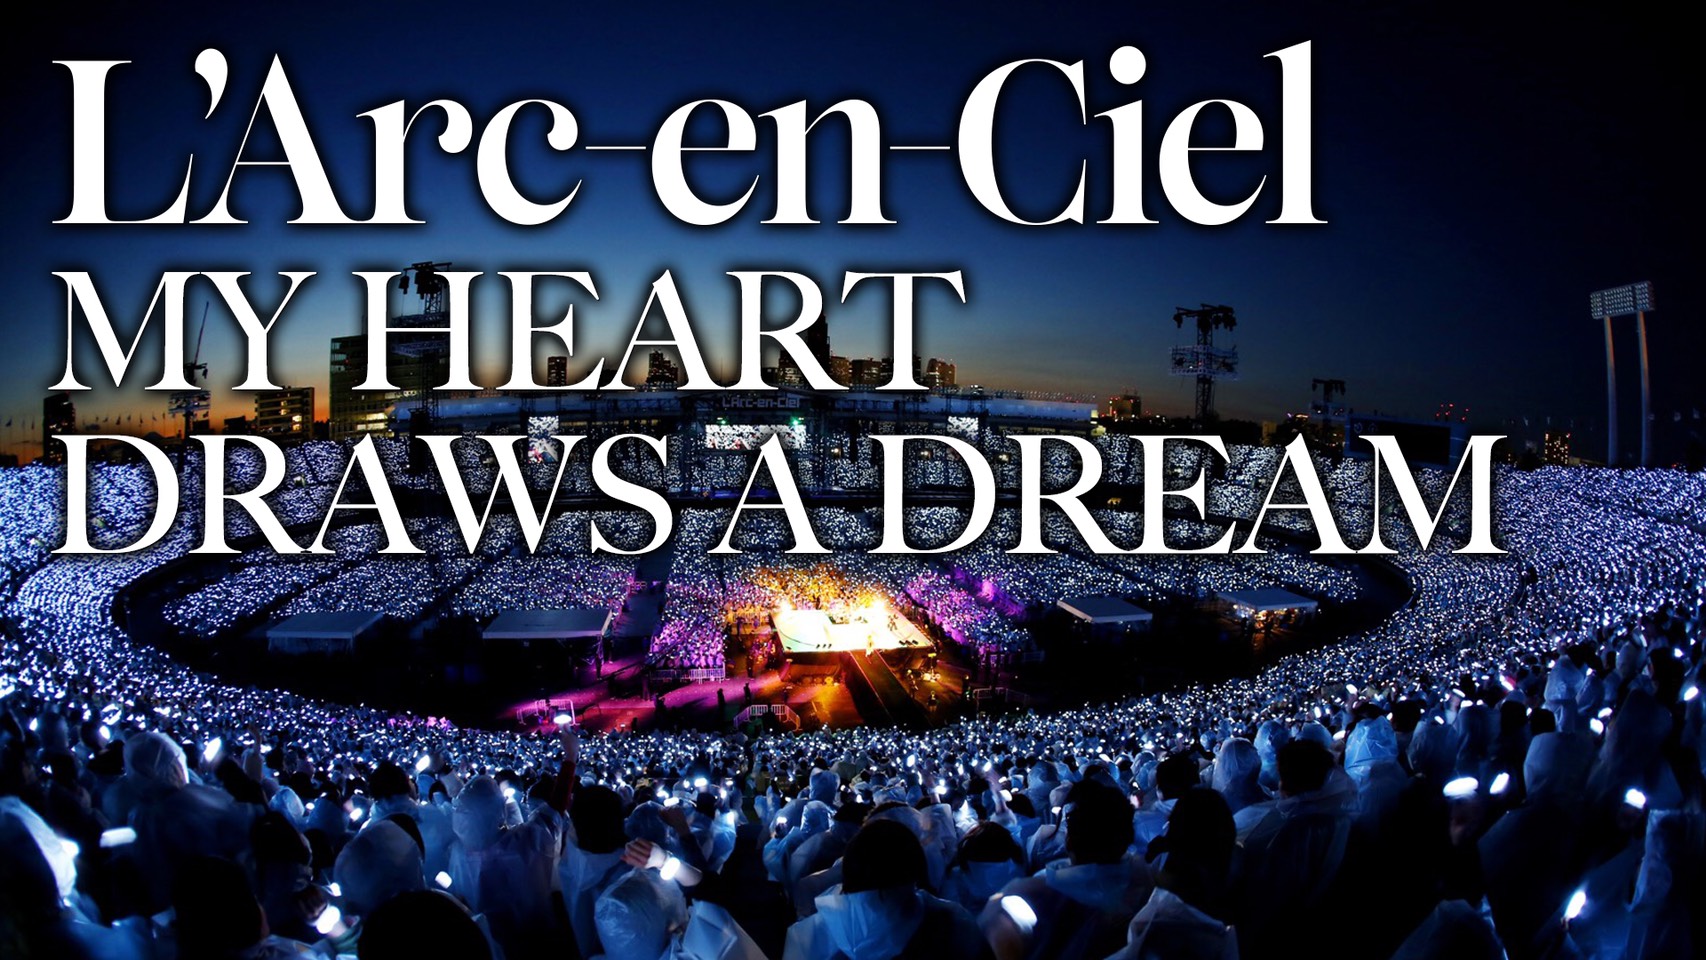 L Arc En Ciel The Live Video Being Unveiled At 24 00 Today Is My Heart Draws A Dream L Arc En Ciel Live 14 At National Studium Please Stay Tuned T Co Nguhoduqcf To Subscribe To The Channel